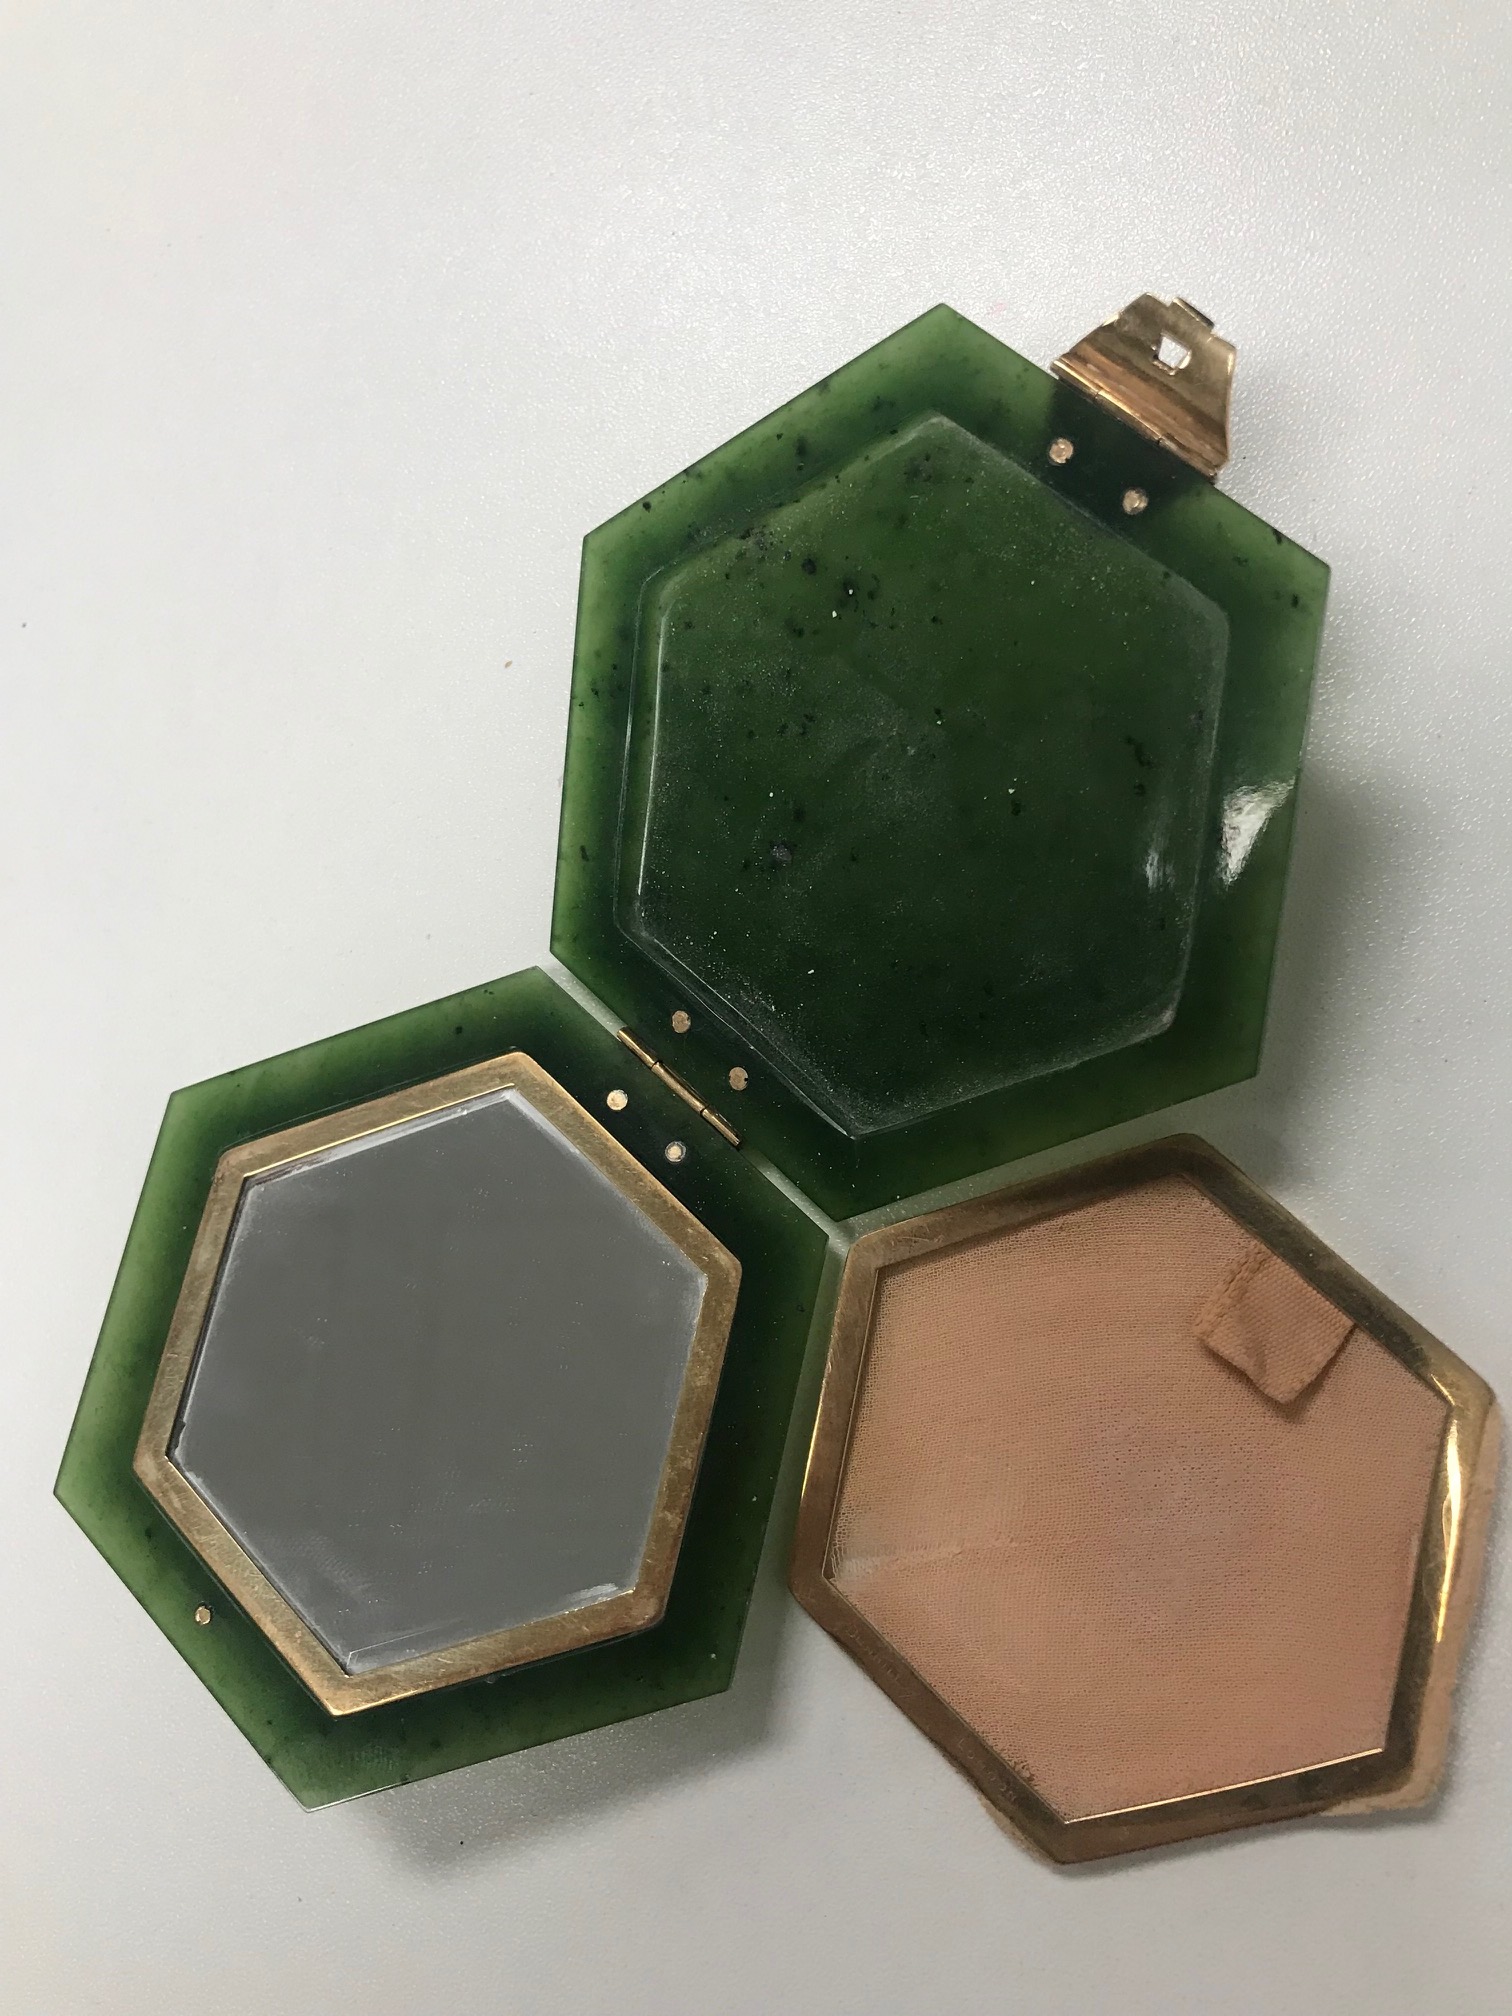 An Art Deco Dunhill nephrite powder compact - Image 4 of 7